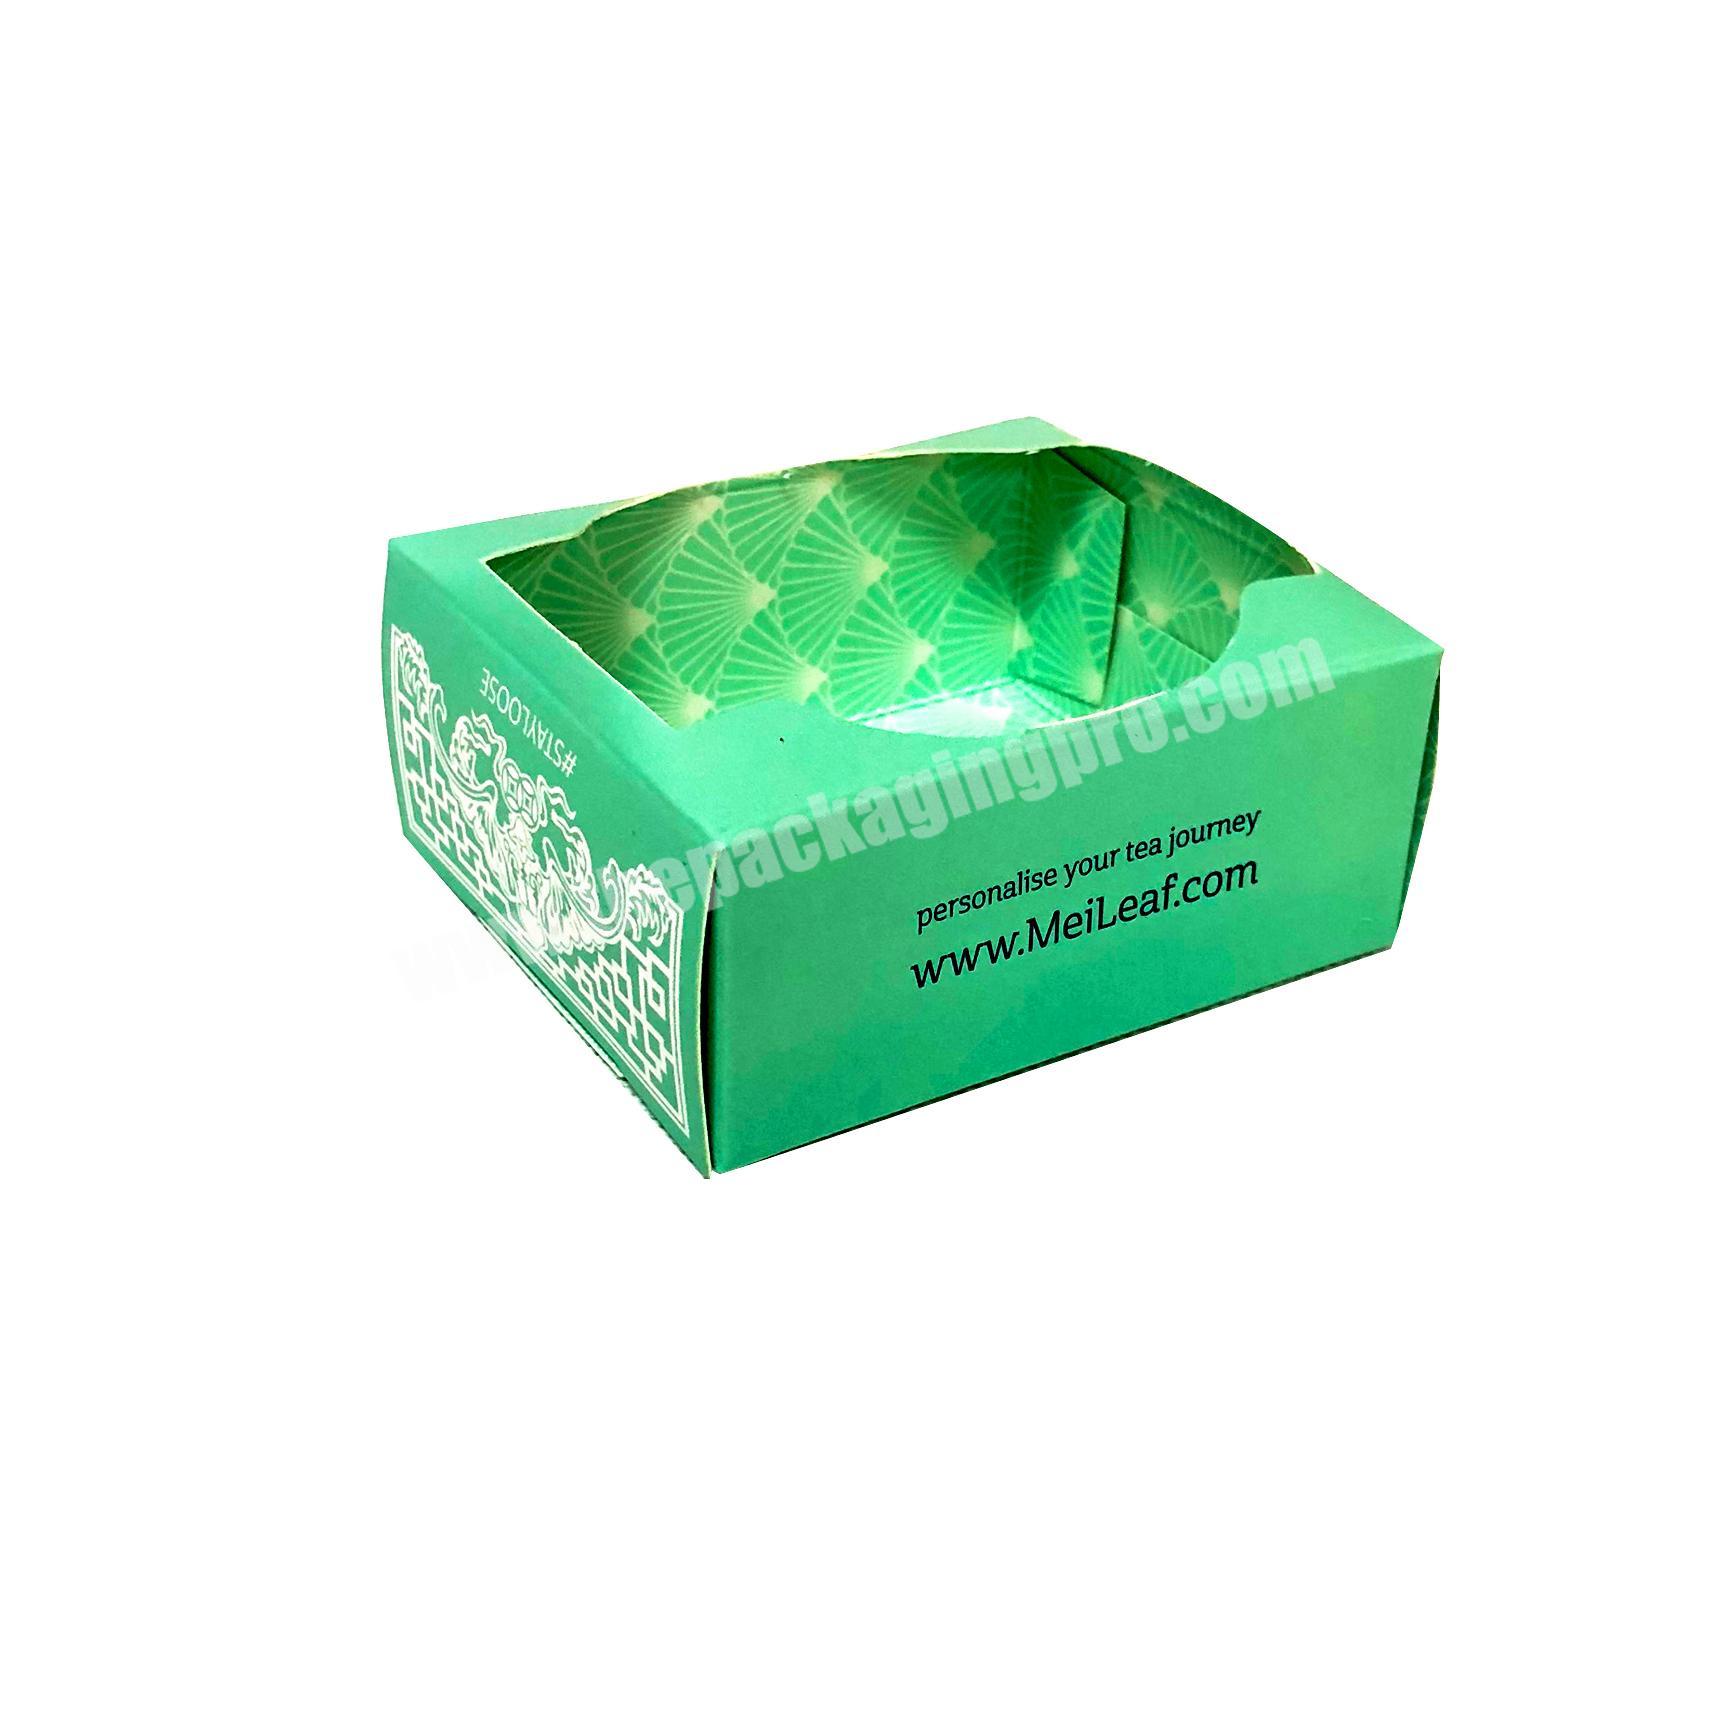 High quality Custom Made  Tea Bags Food Packaging Boxes For Windows carrier bags